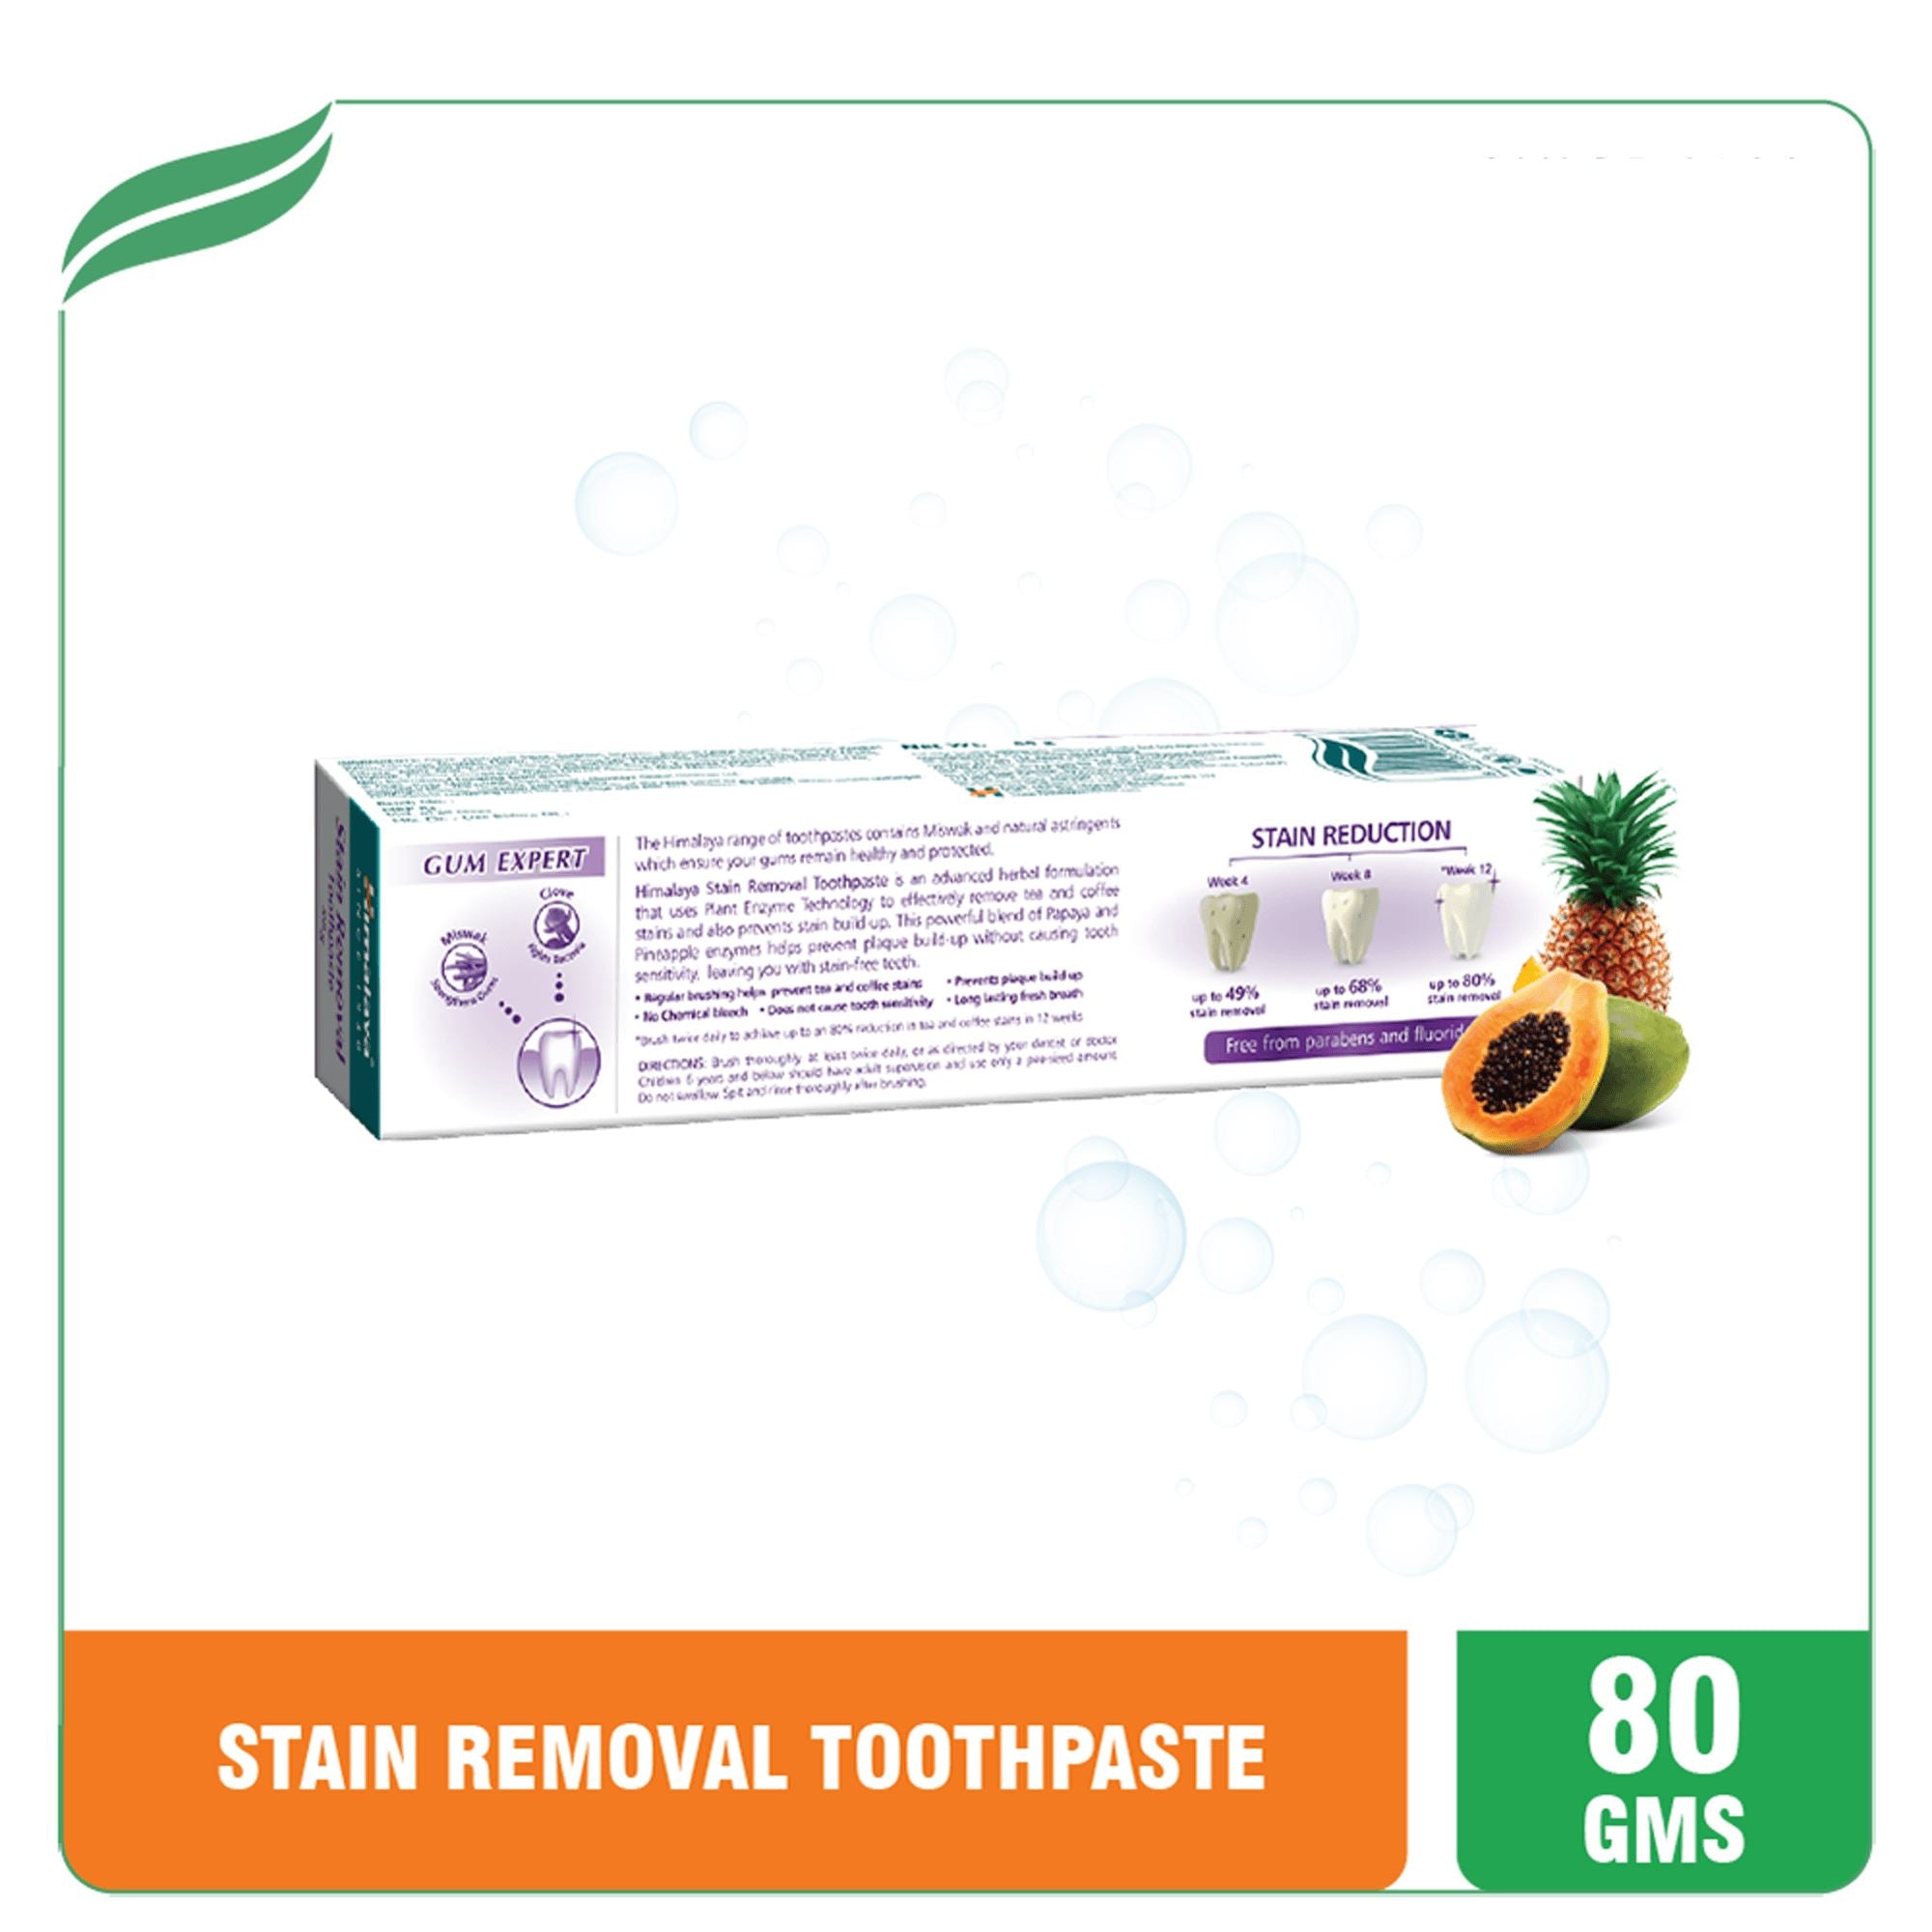 Himalaya Stain Removal Toothpaste Ingredients